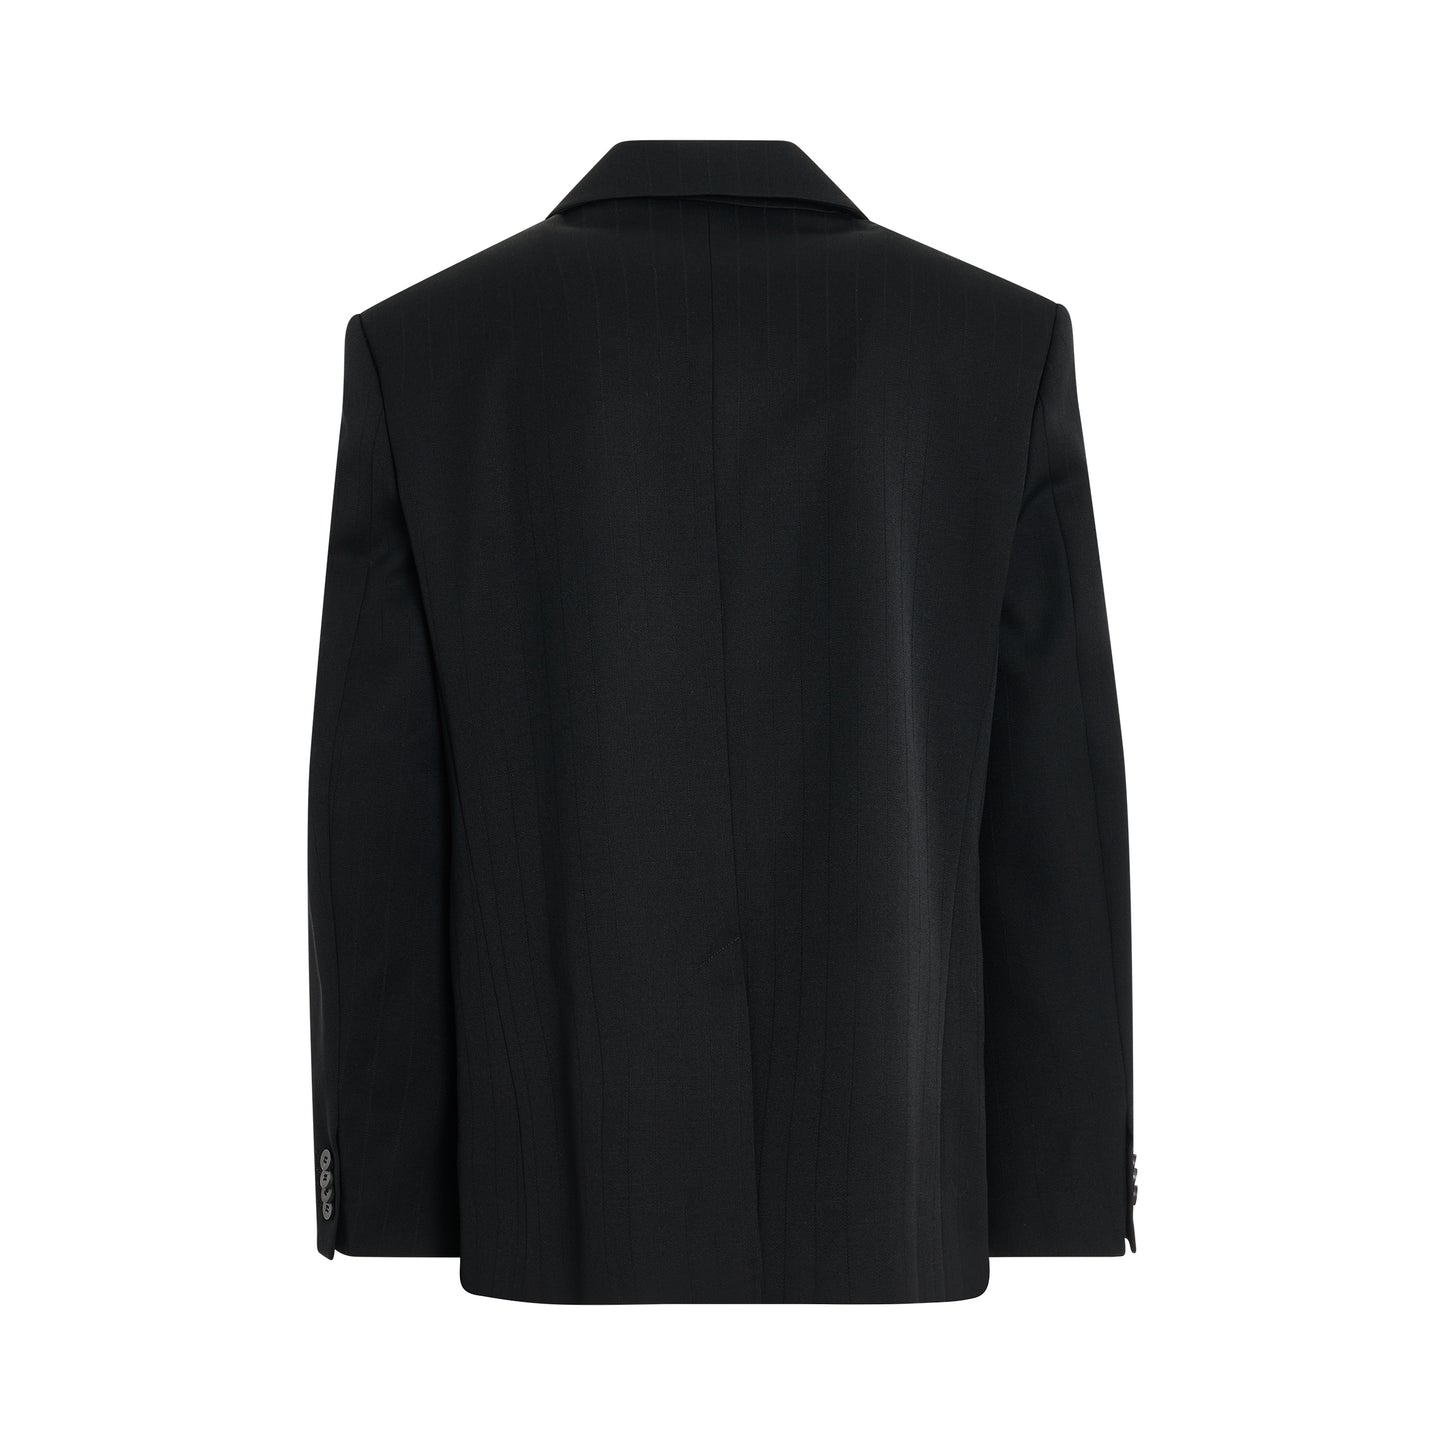 Titolo Suit Jacket in Pinstripe Black